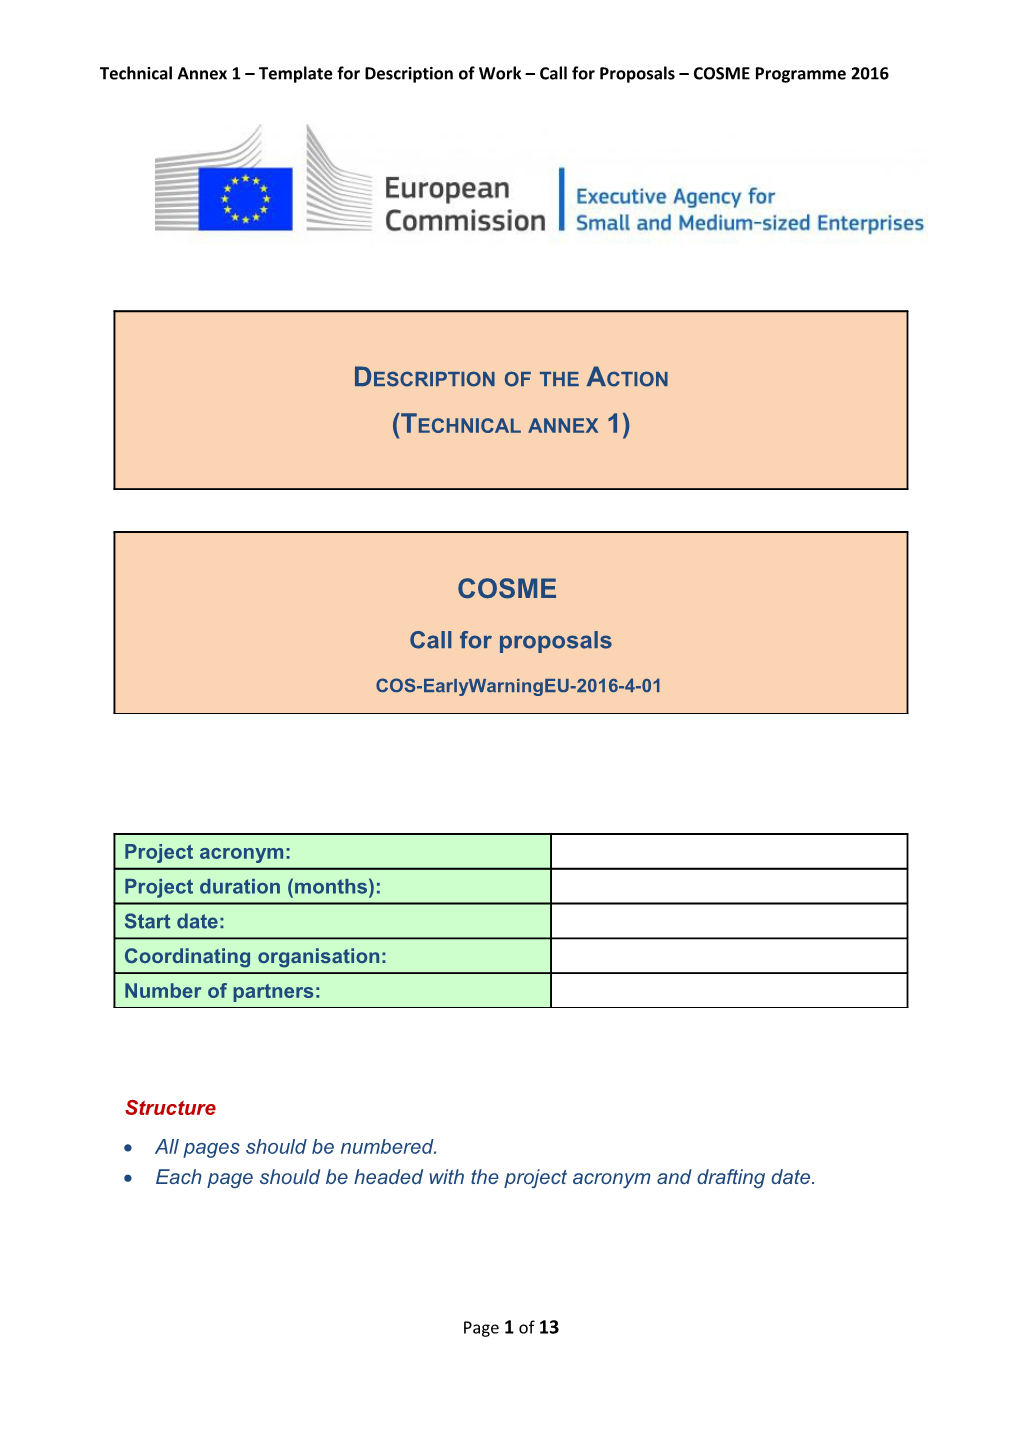 Technical Annex 1 Template for Description of Work Call for Proposals COSME Programme 2016